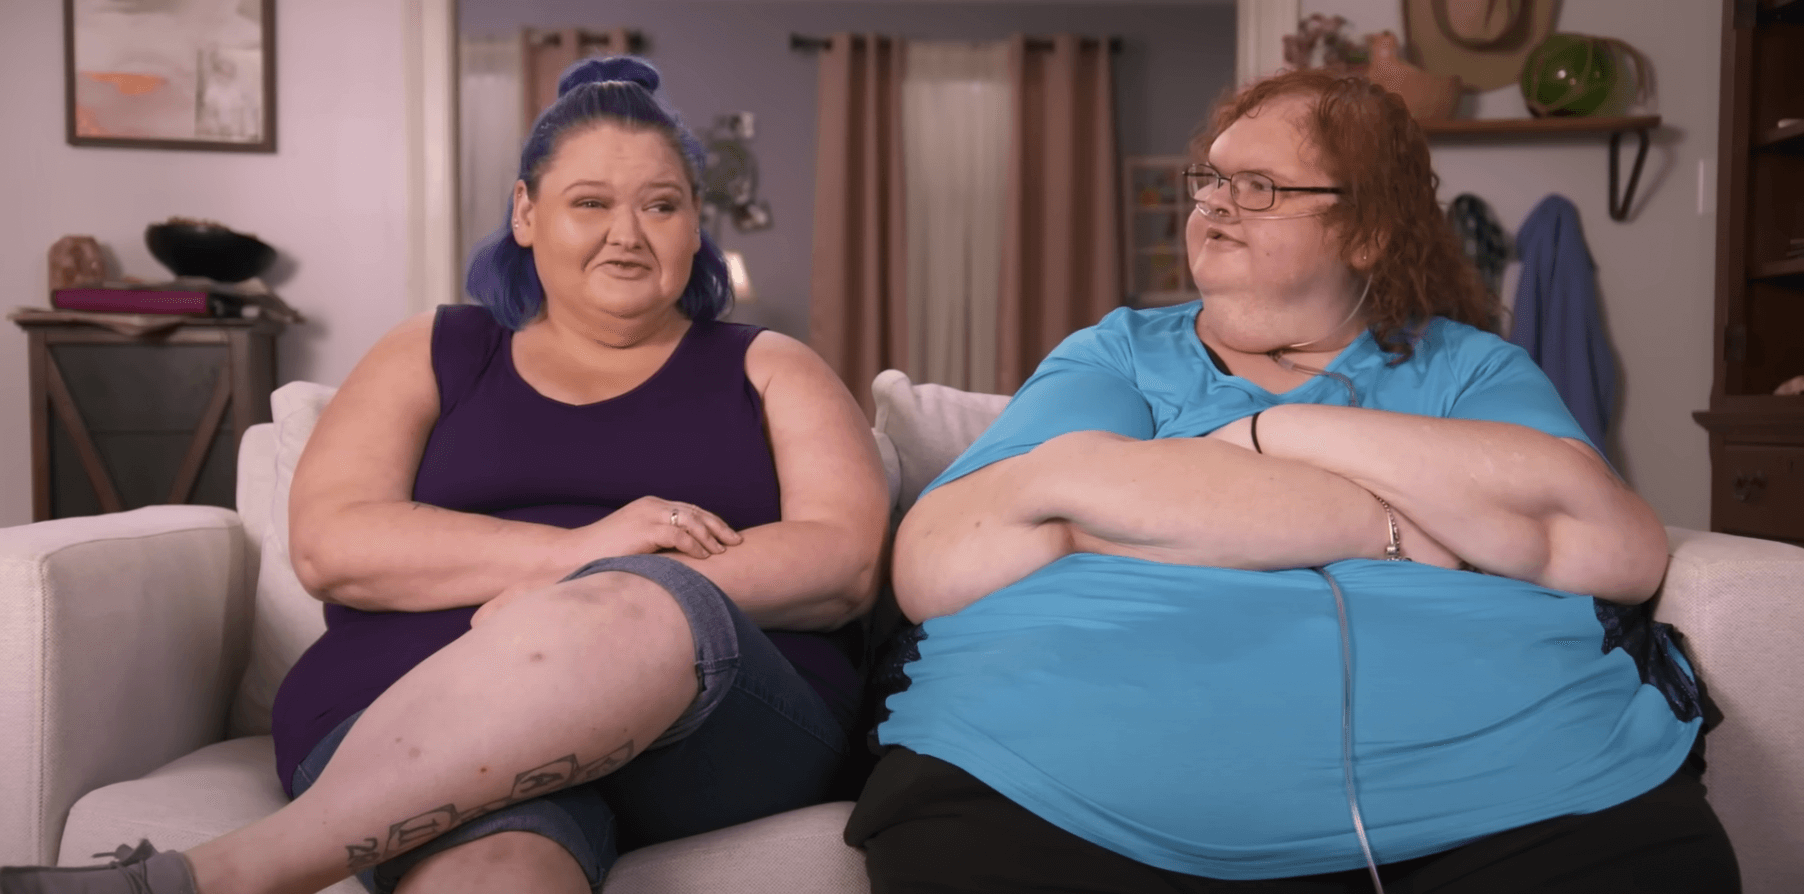 Amy Slaton and Tammy Slaton sitting next to each other on a couch in '1000-Lb. Sisters' Season 5